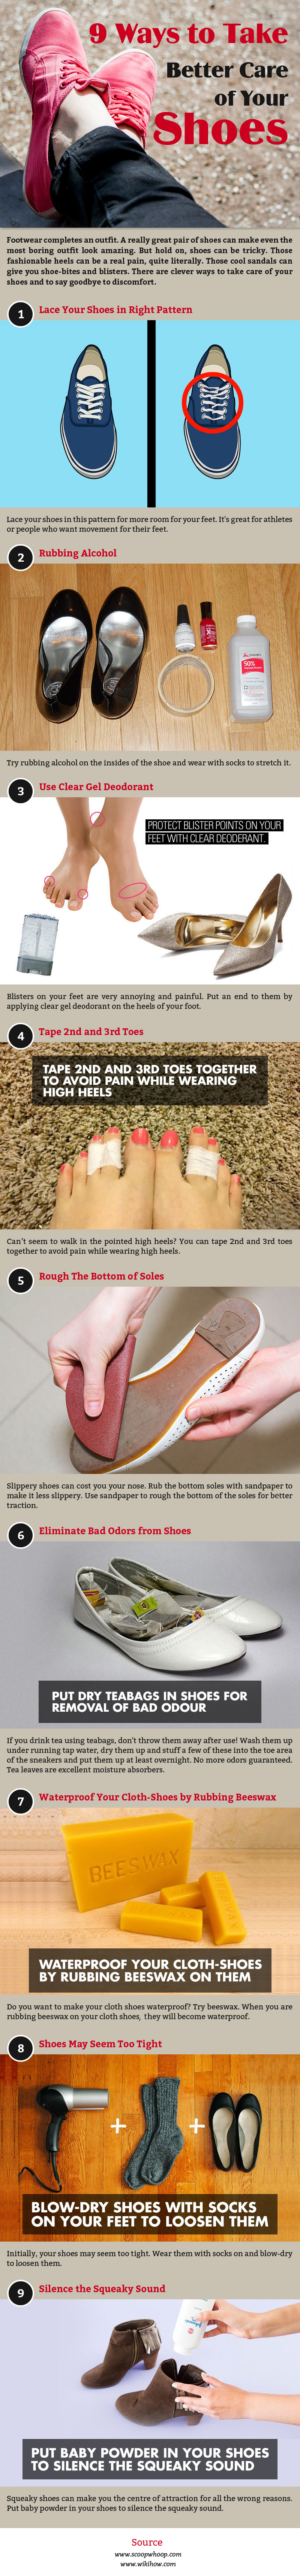 9-ways-to-take-better-care-of-your-shoes